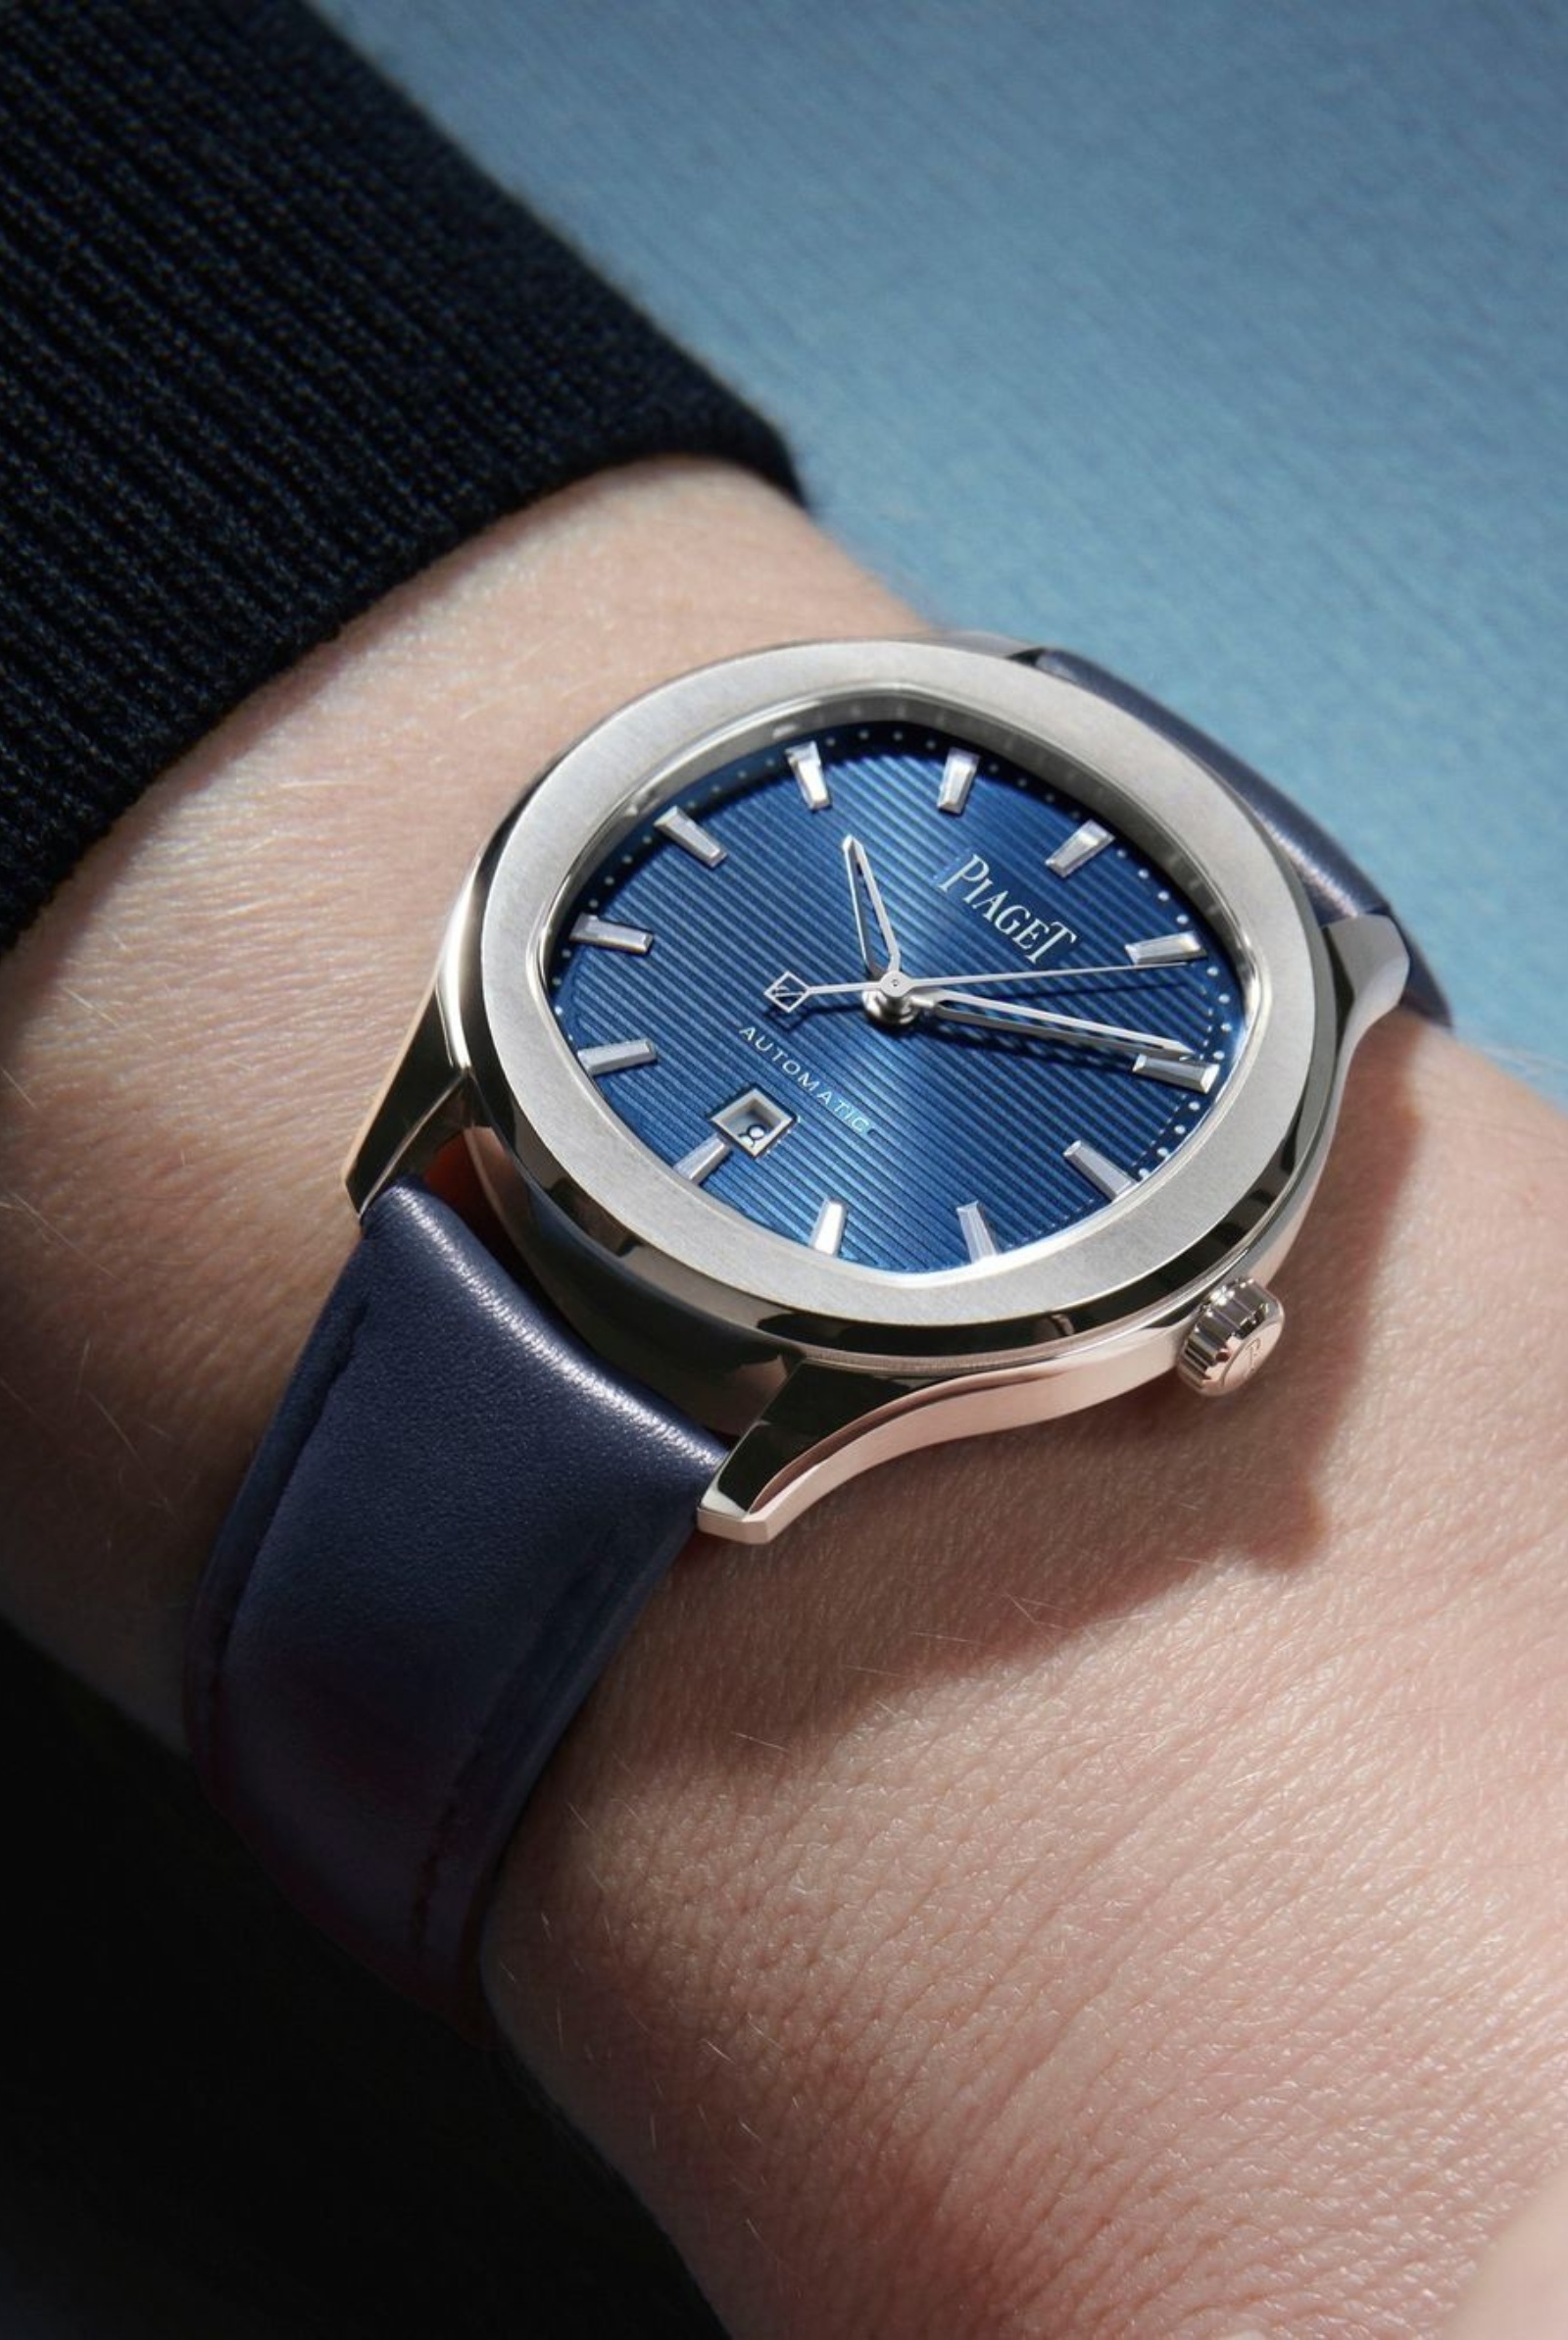 Piaget's Polo Date watch